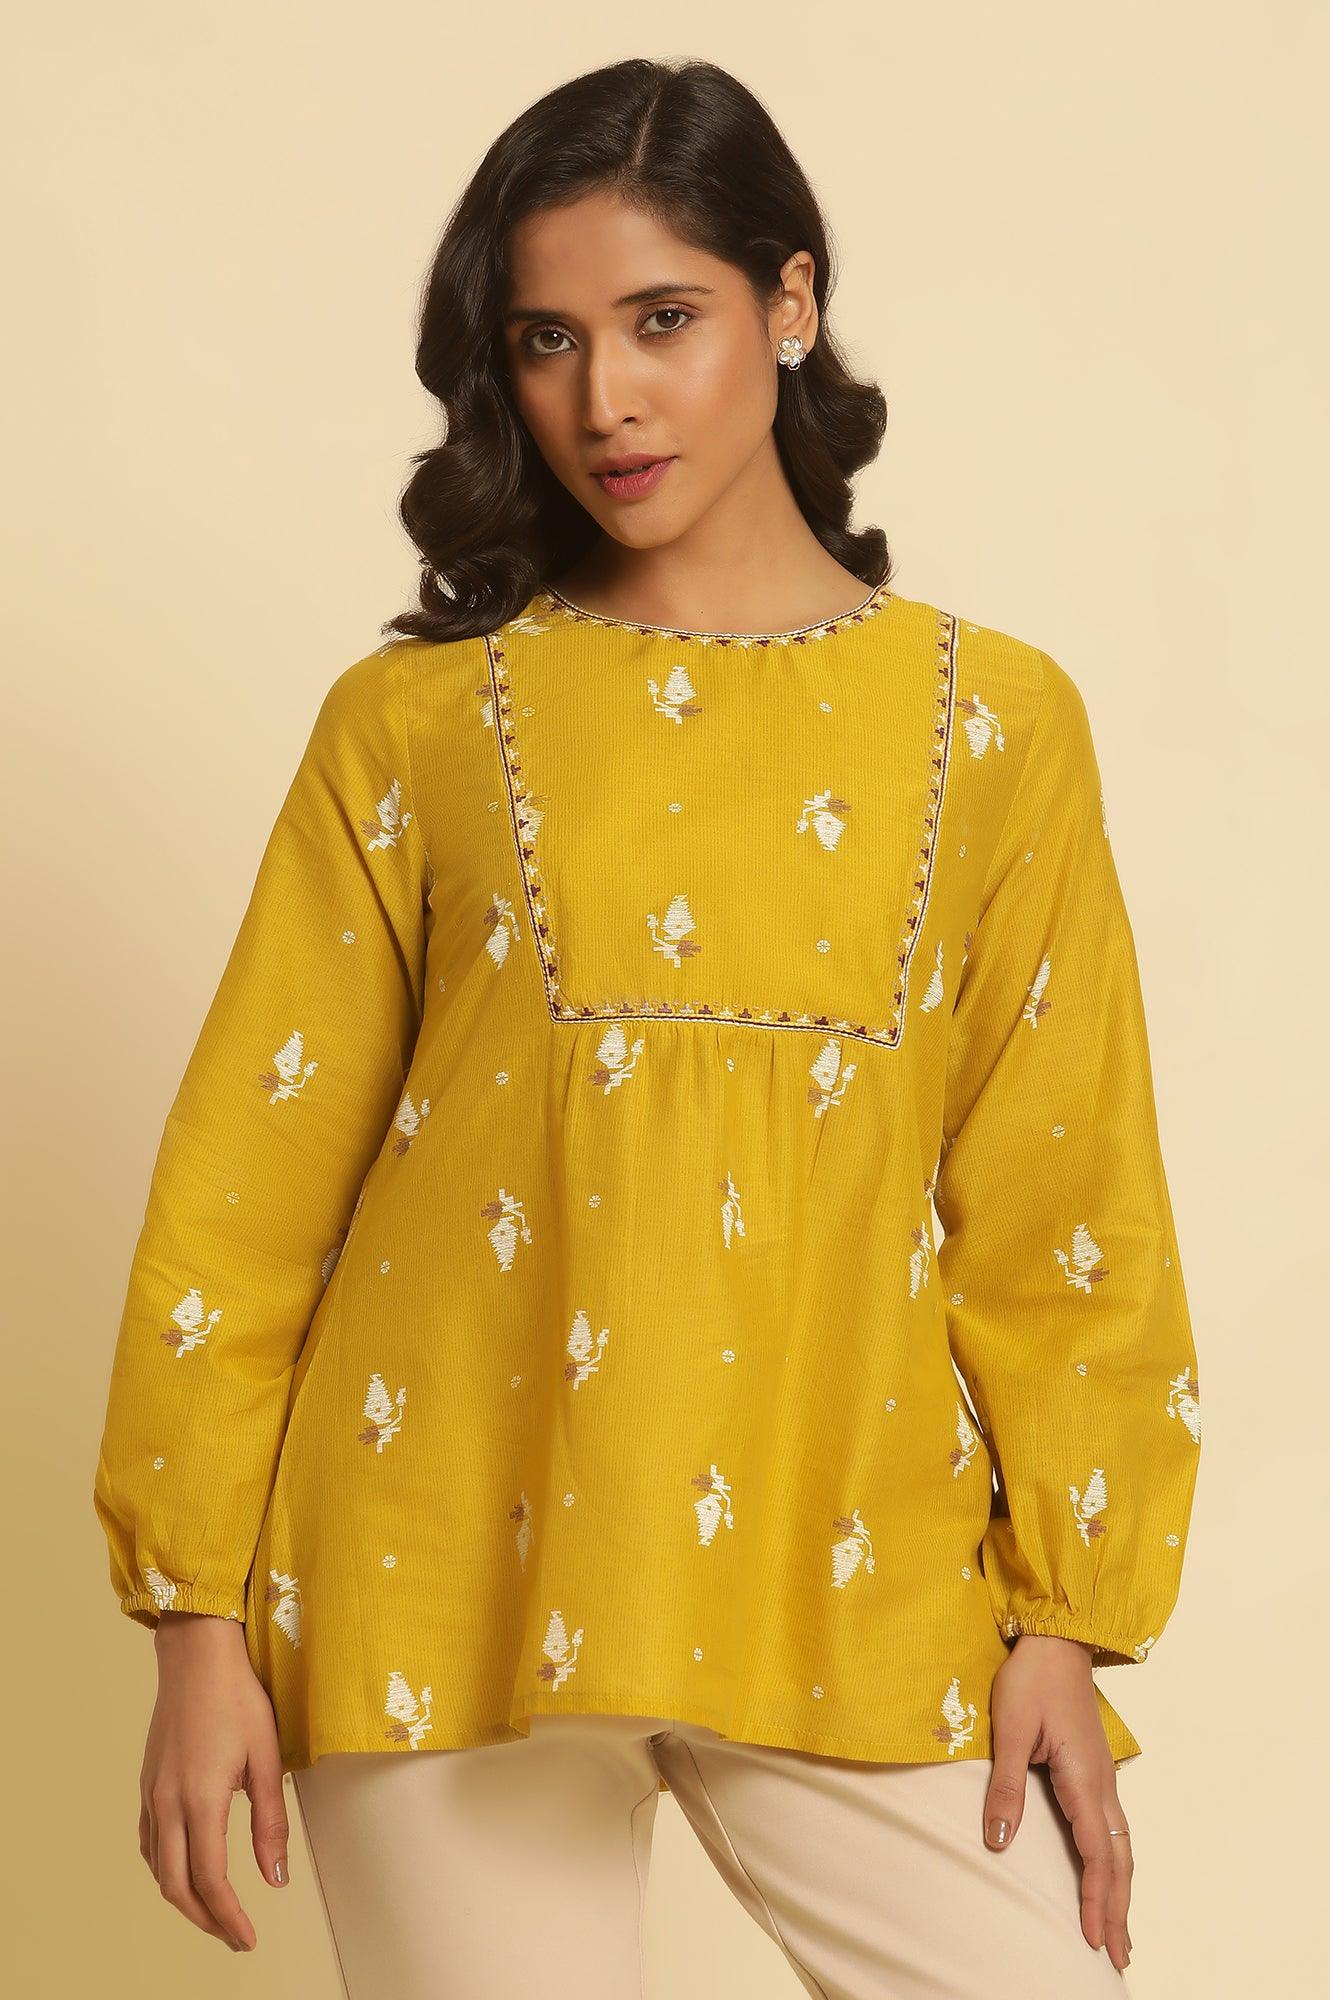 Yellow Geometric Printed And Embroidered Top - wforwoman